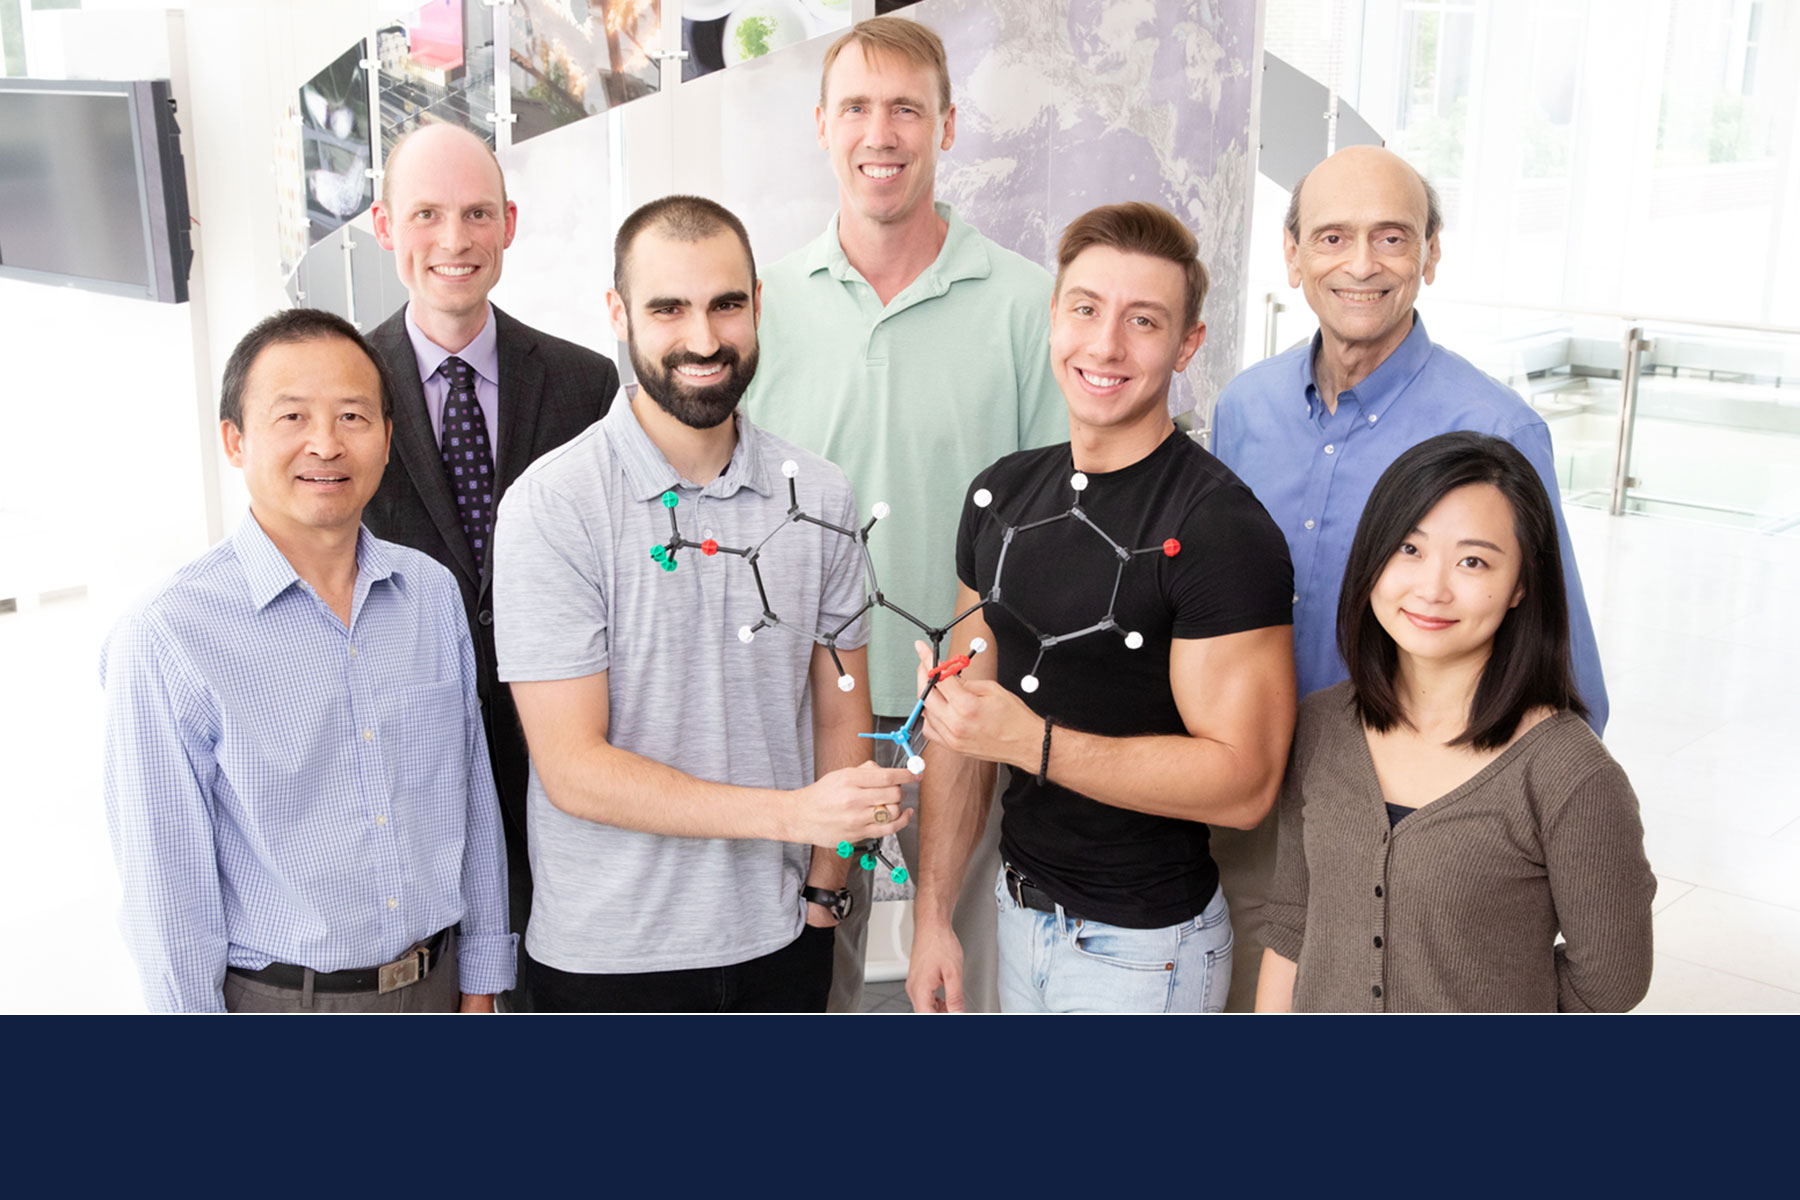 Illinois researchers on the study include, from front left, research scientist Chengjian Mao and graduate students Matthew Boudreau, Darjan Duraki and Ji Eun Kim. In the back row, from left, are molecular and integrative physiology professor Erik Nelson, chemistry professor Paul Hergenrother and biochemistry professor David Shapiro.No photo credit provided.